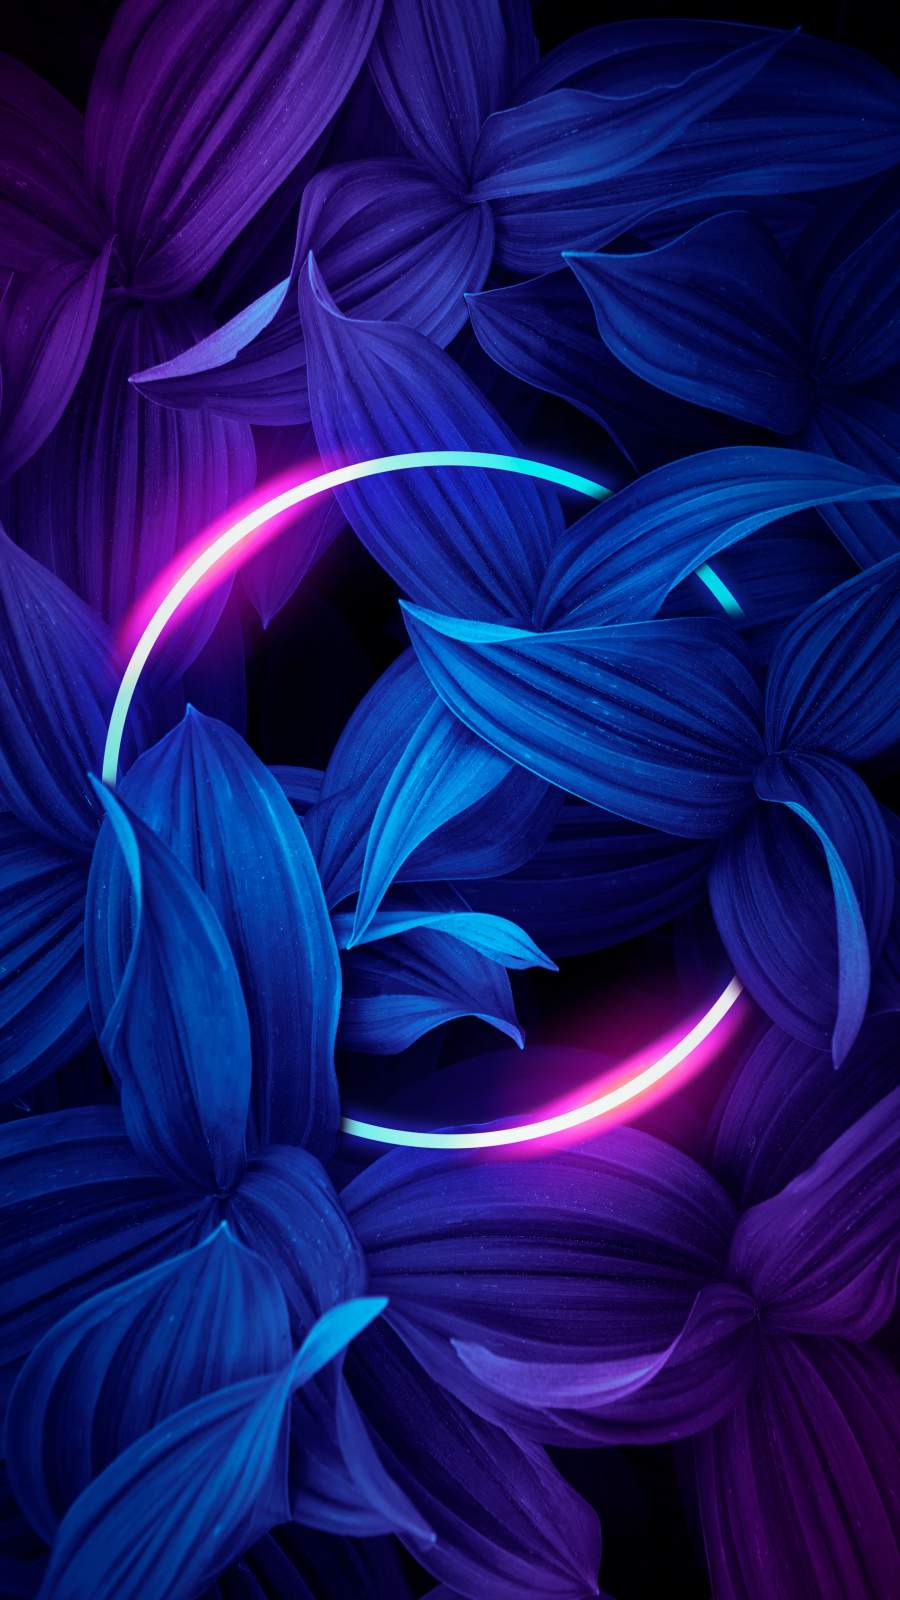 Abstract Nature Iphone Wallpapers